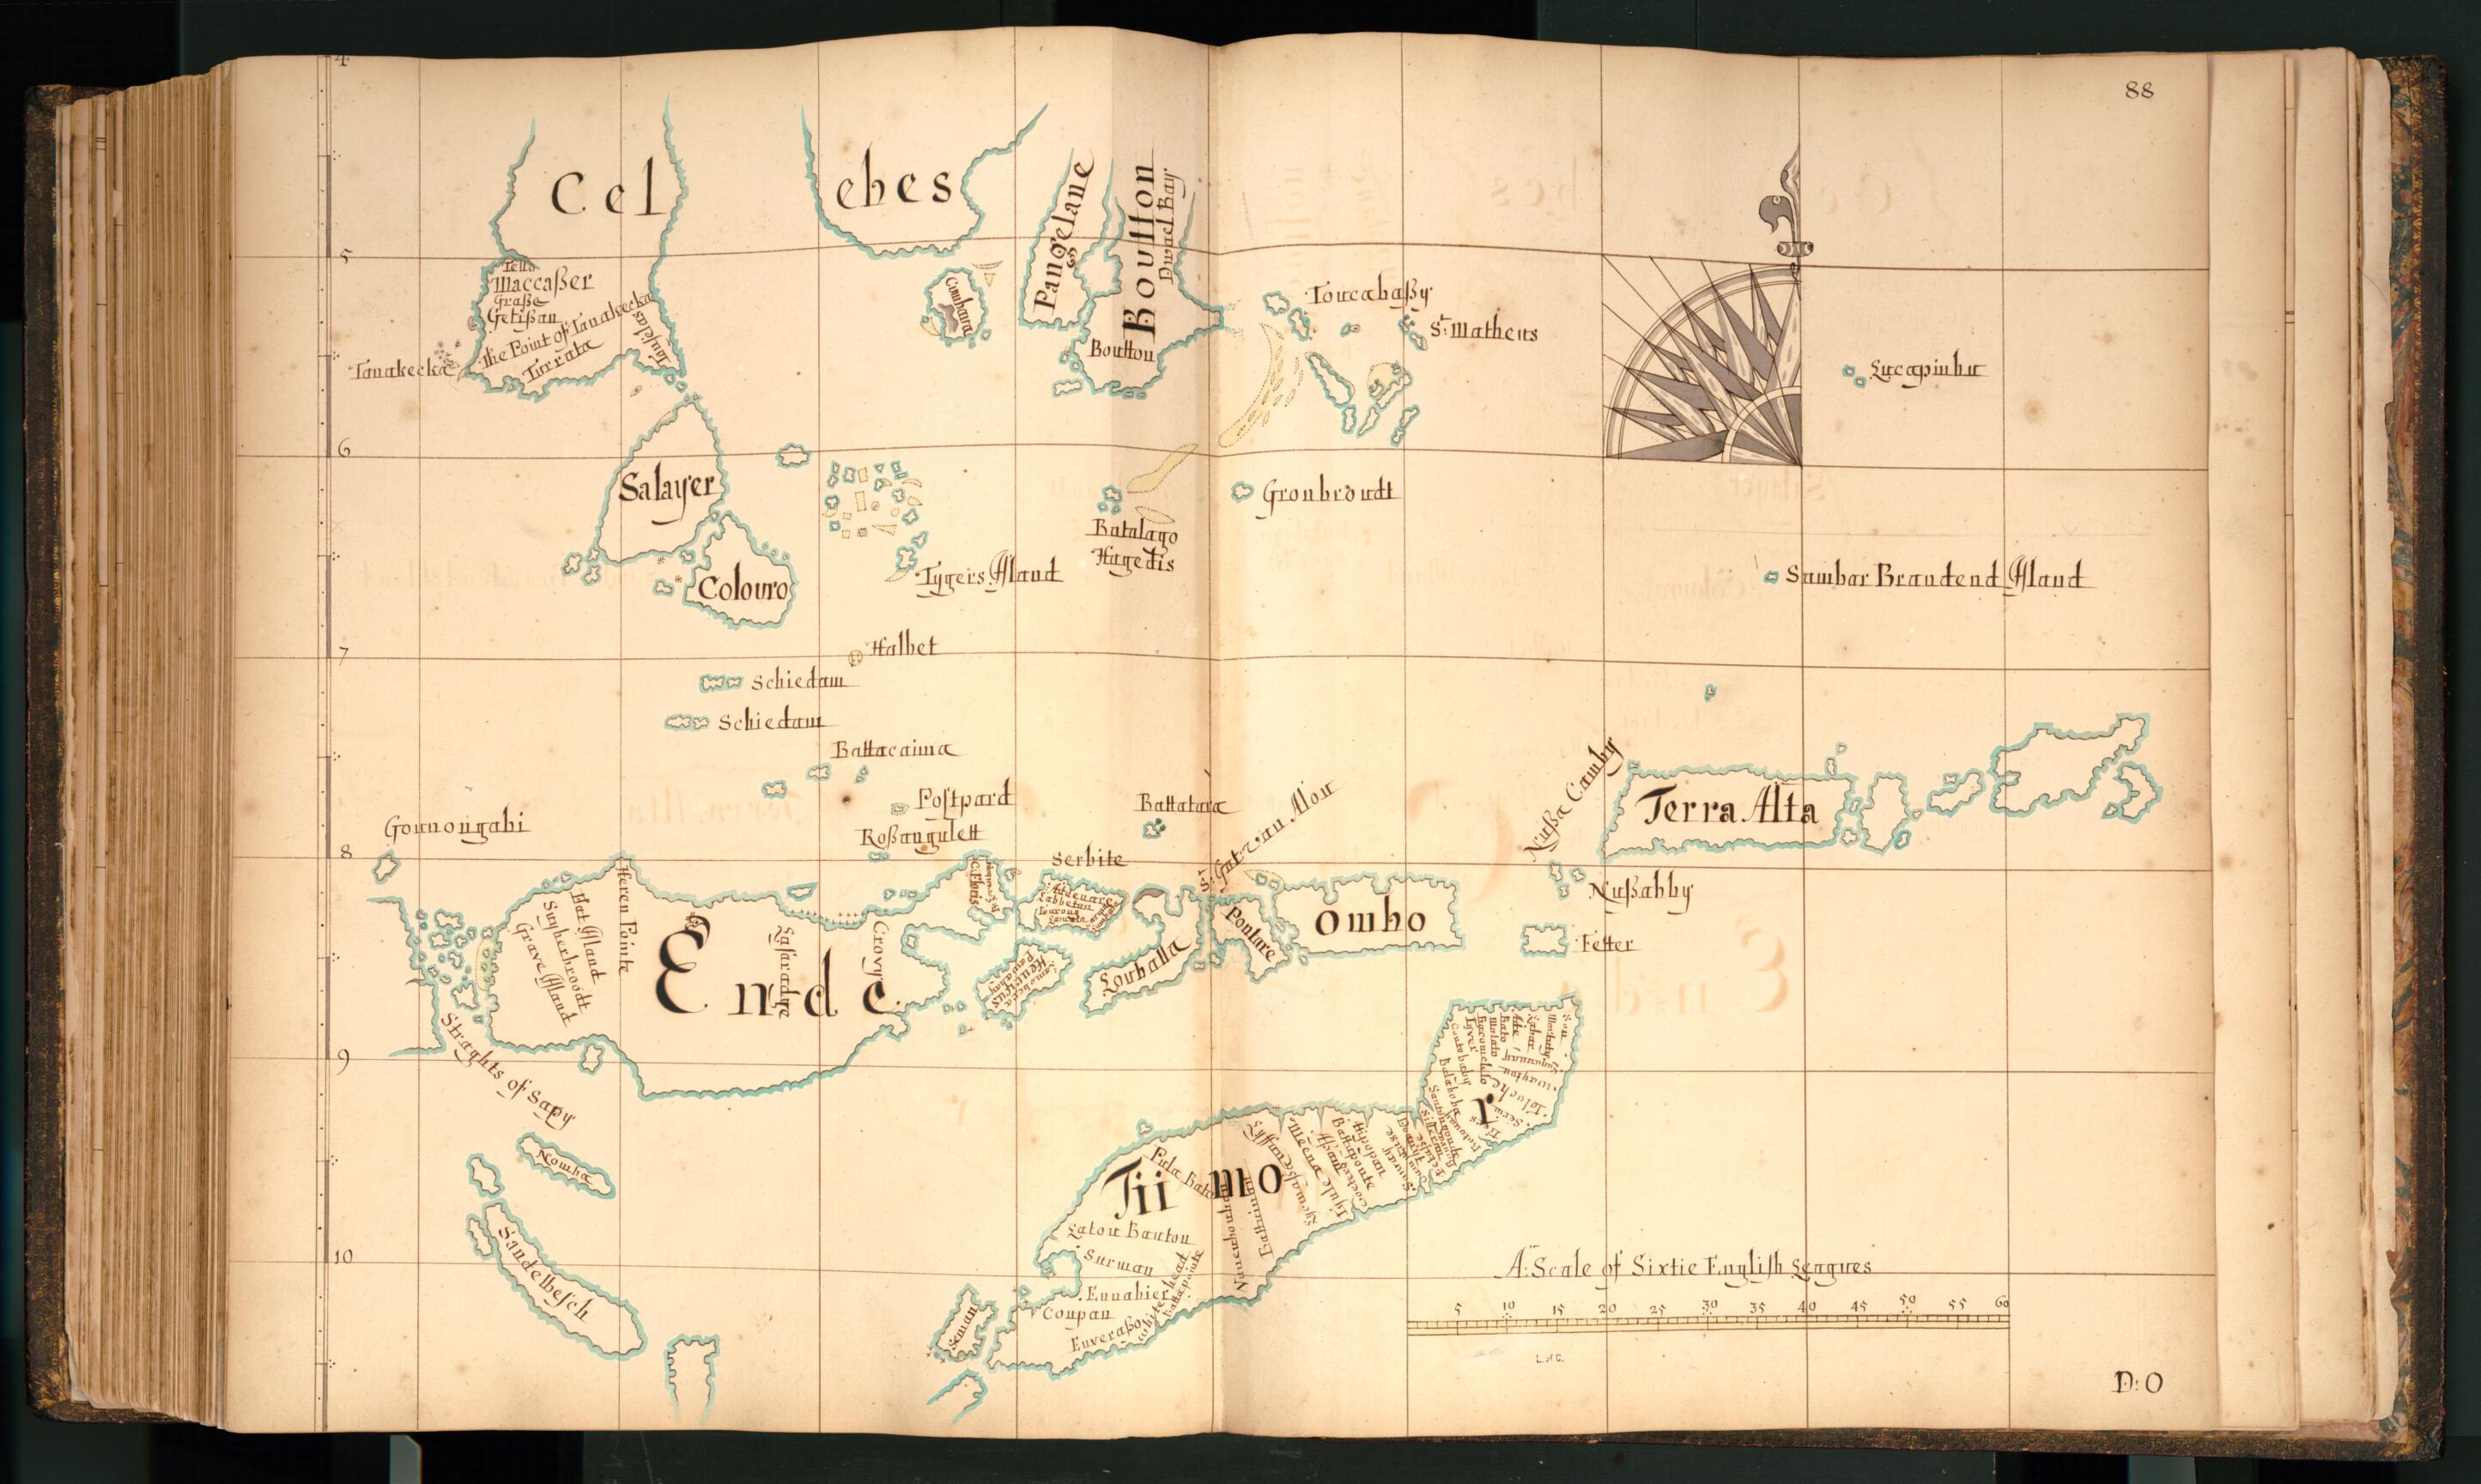 This old map of 88) Celebes, Ende, Tiimor from Buccaneer Atlas from 1690 was created by William Hacke in 1690